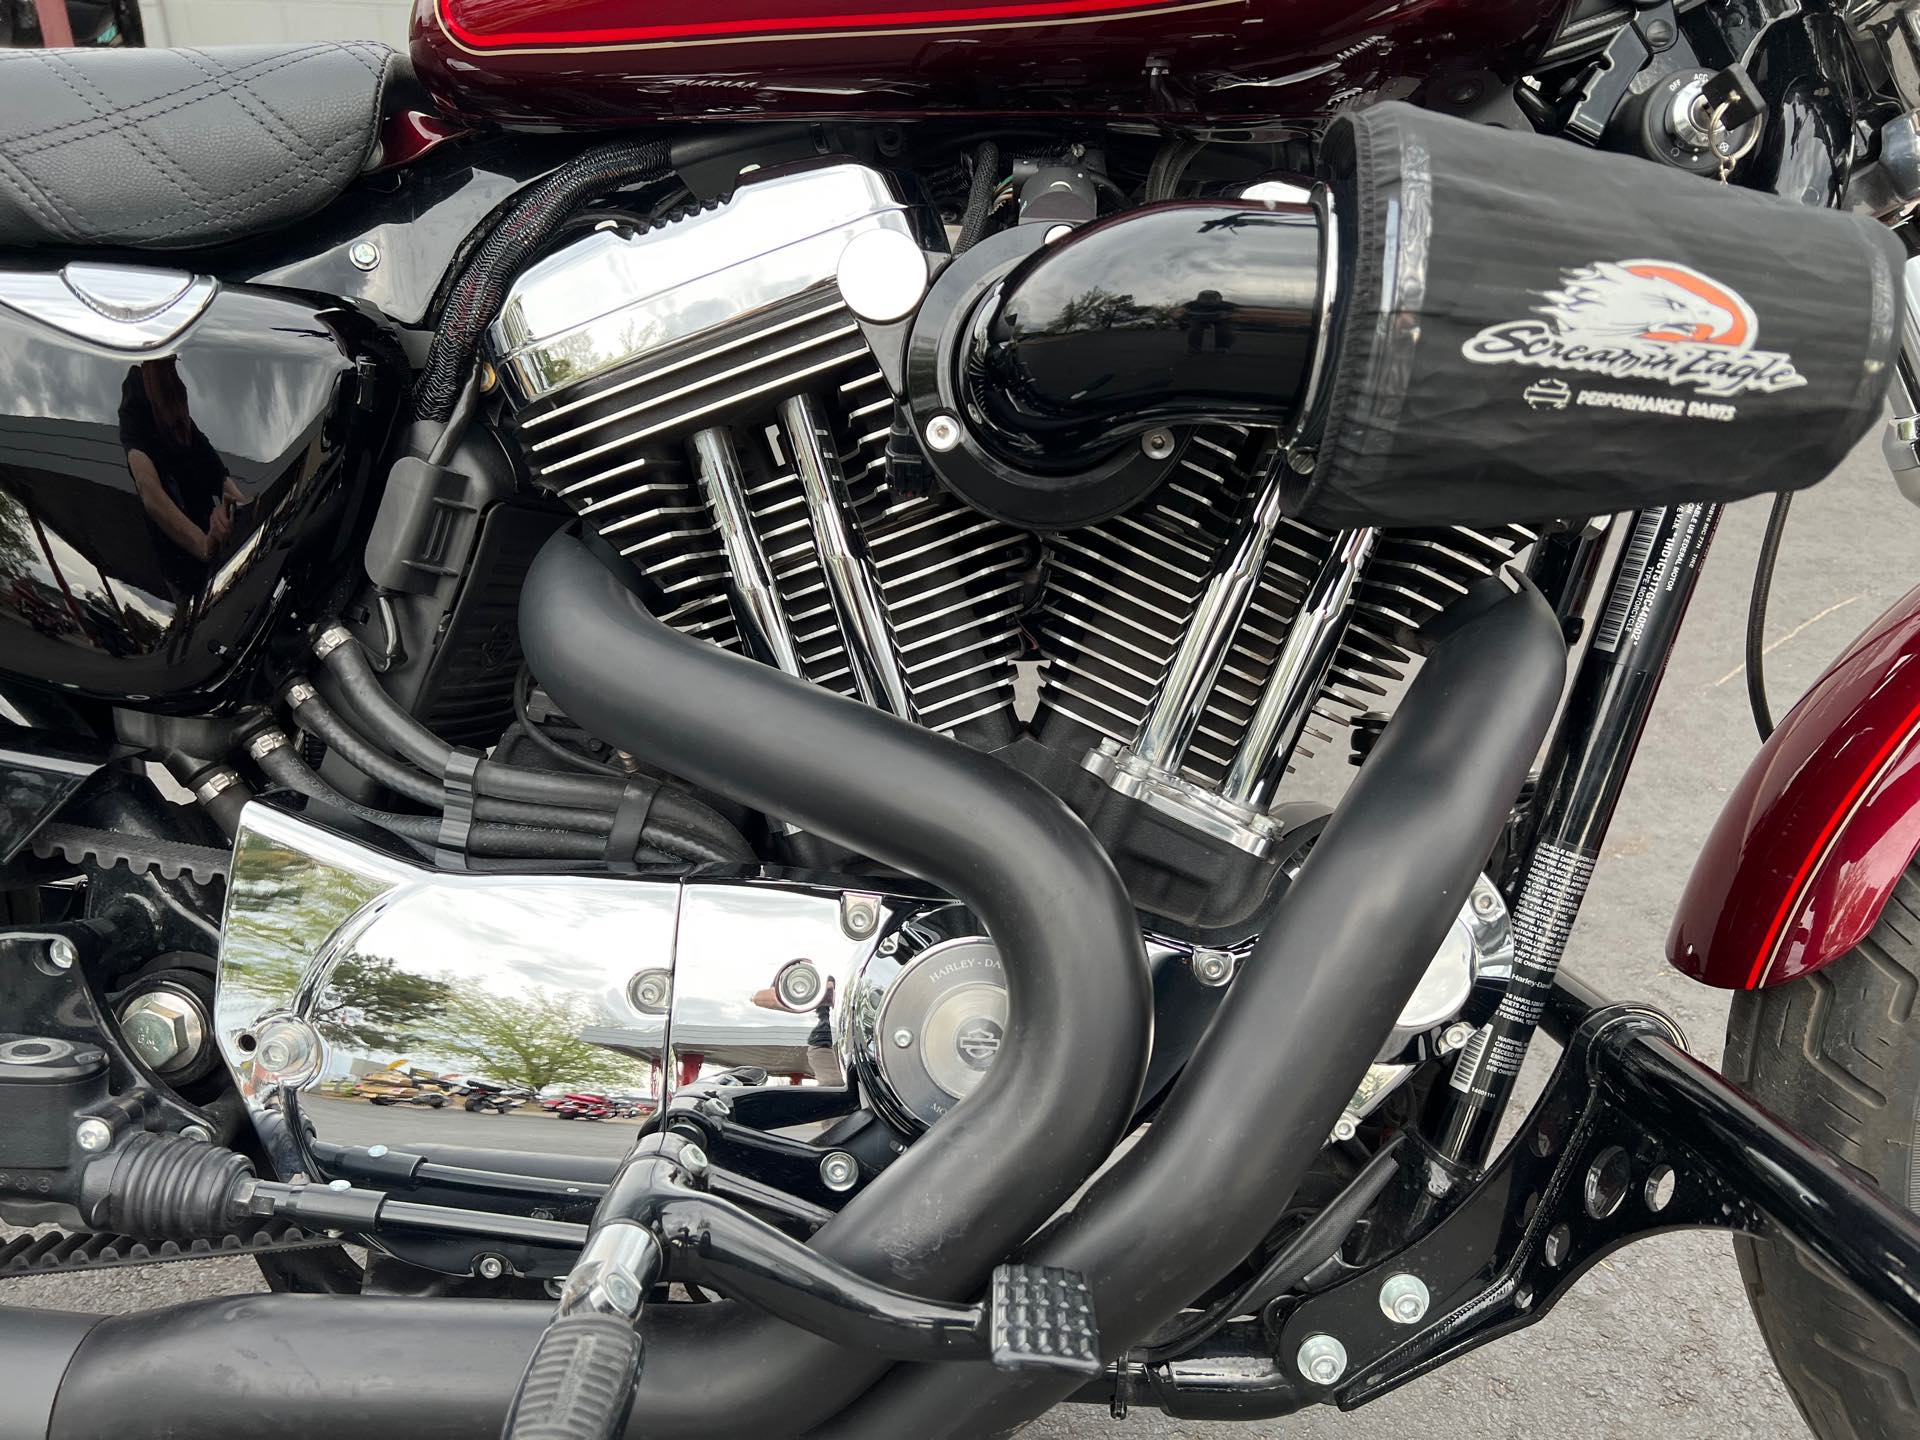 2016 Harley-Davidson Sportster 1200 Custom at Aces Motorcycles - Fort Collins